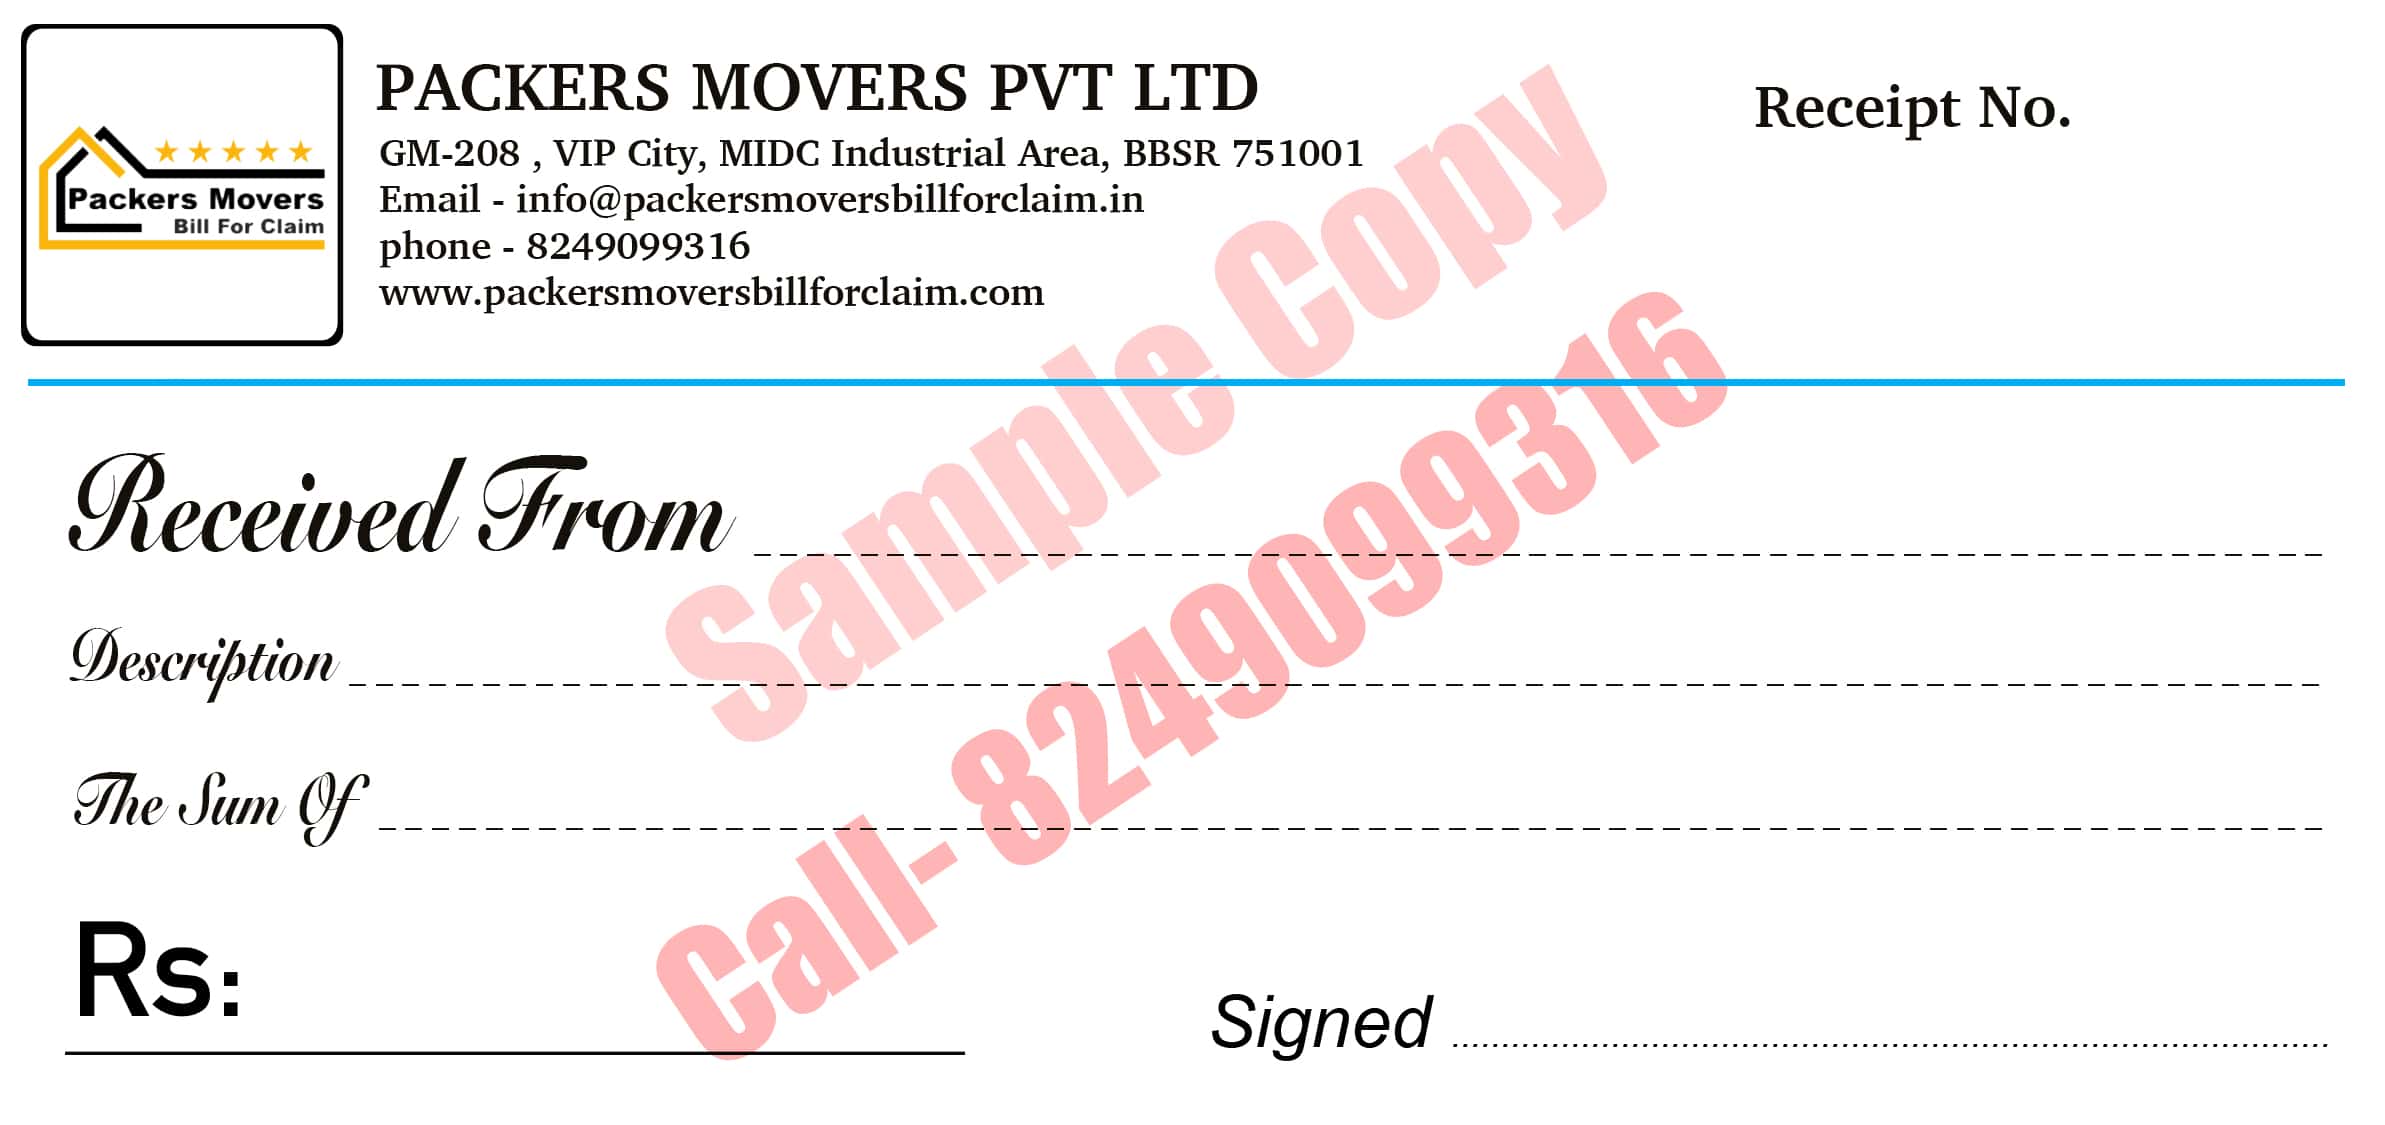 Cash Memo or cash Receipt of Packers and Movers Bill for Claim